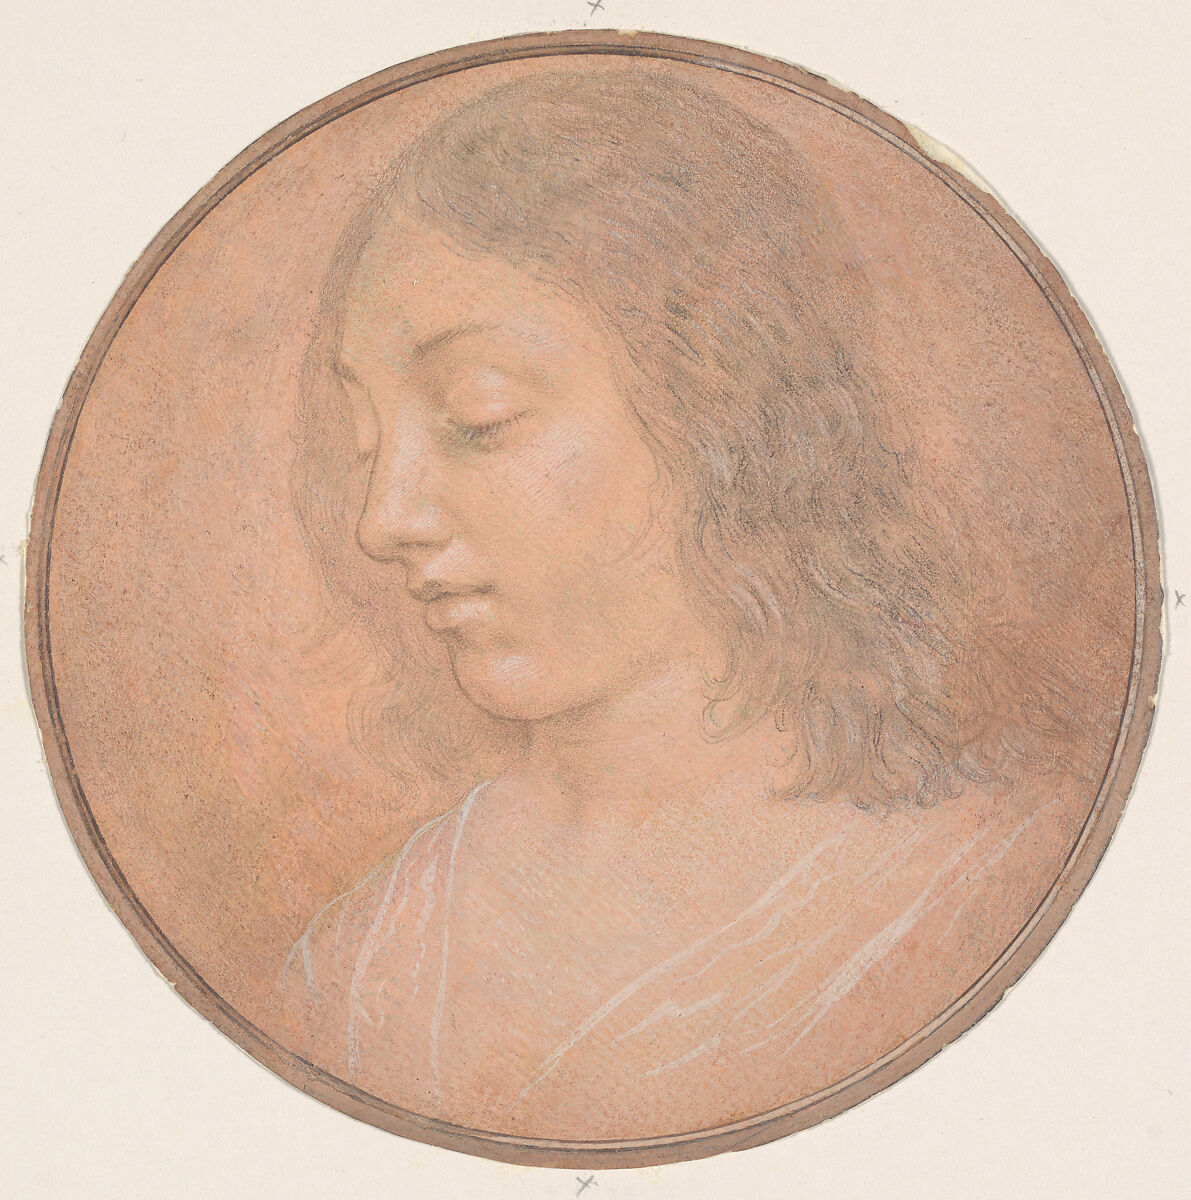 Head of a Young Woman, Attributed to Lorenzo di Credi (Lorenzo d&#39;Andrea d&#39;Oderigo) (Italian, Florence 1456/59–1536 Florence), Metalpoint, heightened with white, on pink prepared paper; profile retouched in brownish chalk, hair retouched in black chalk, and highlights added to bust, all by a later hand. 